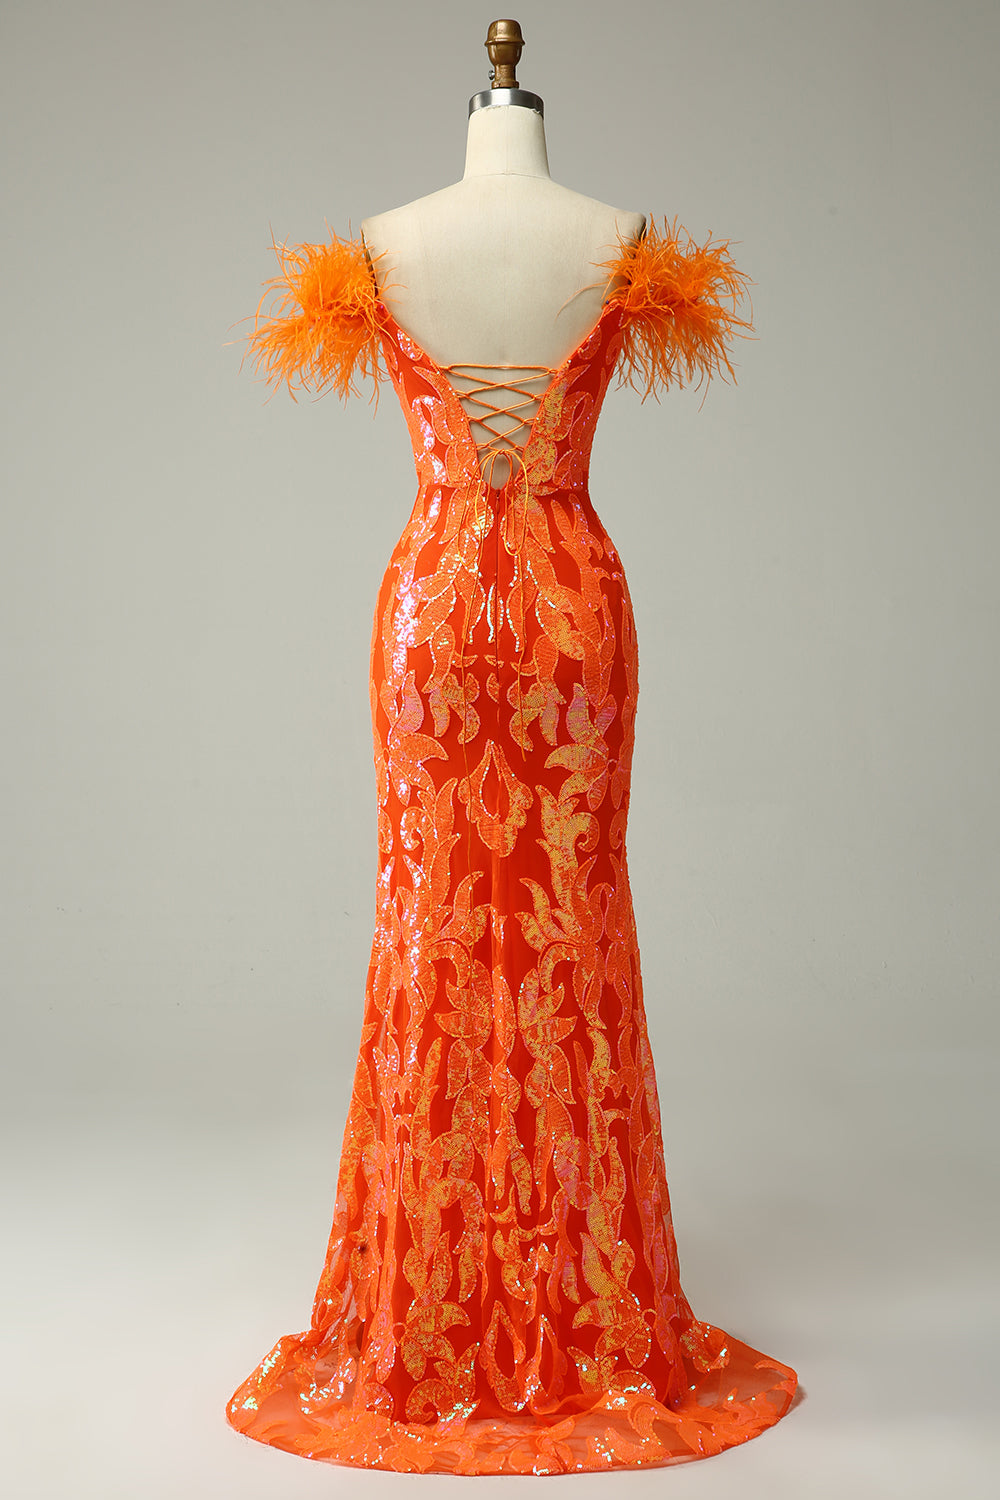 Orange Mermaid Off the Shoulder Sequins Prom Dress with Feathers